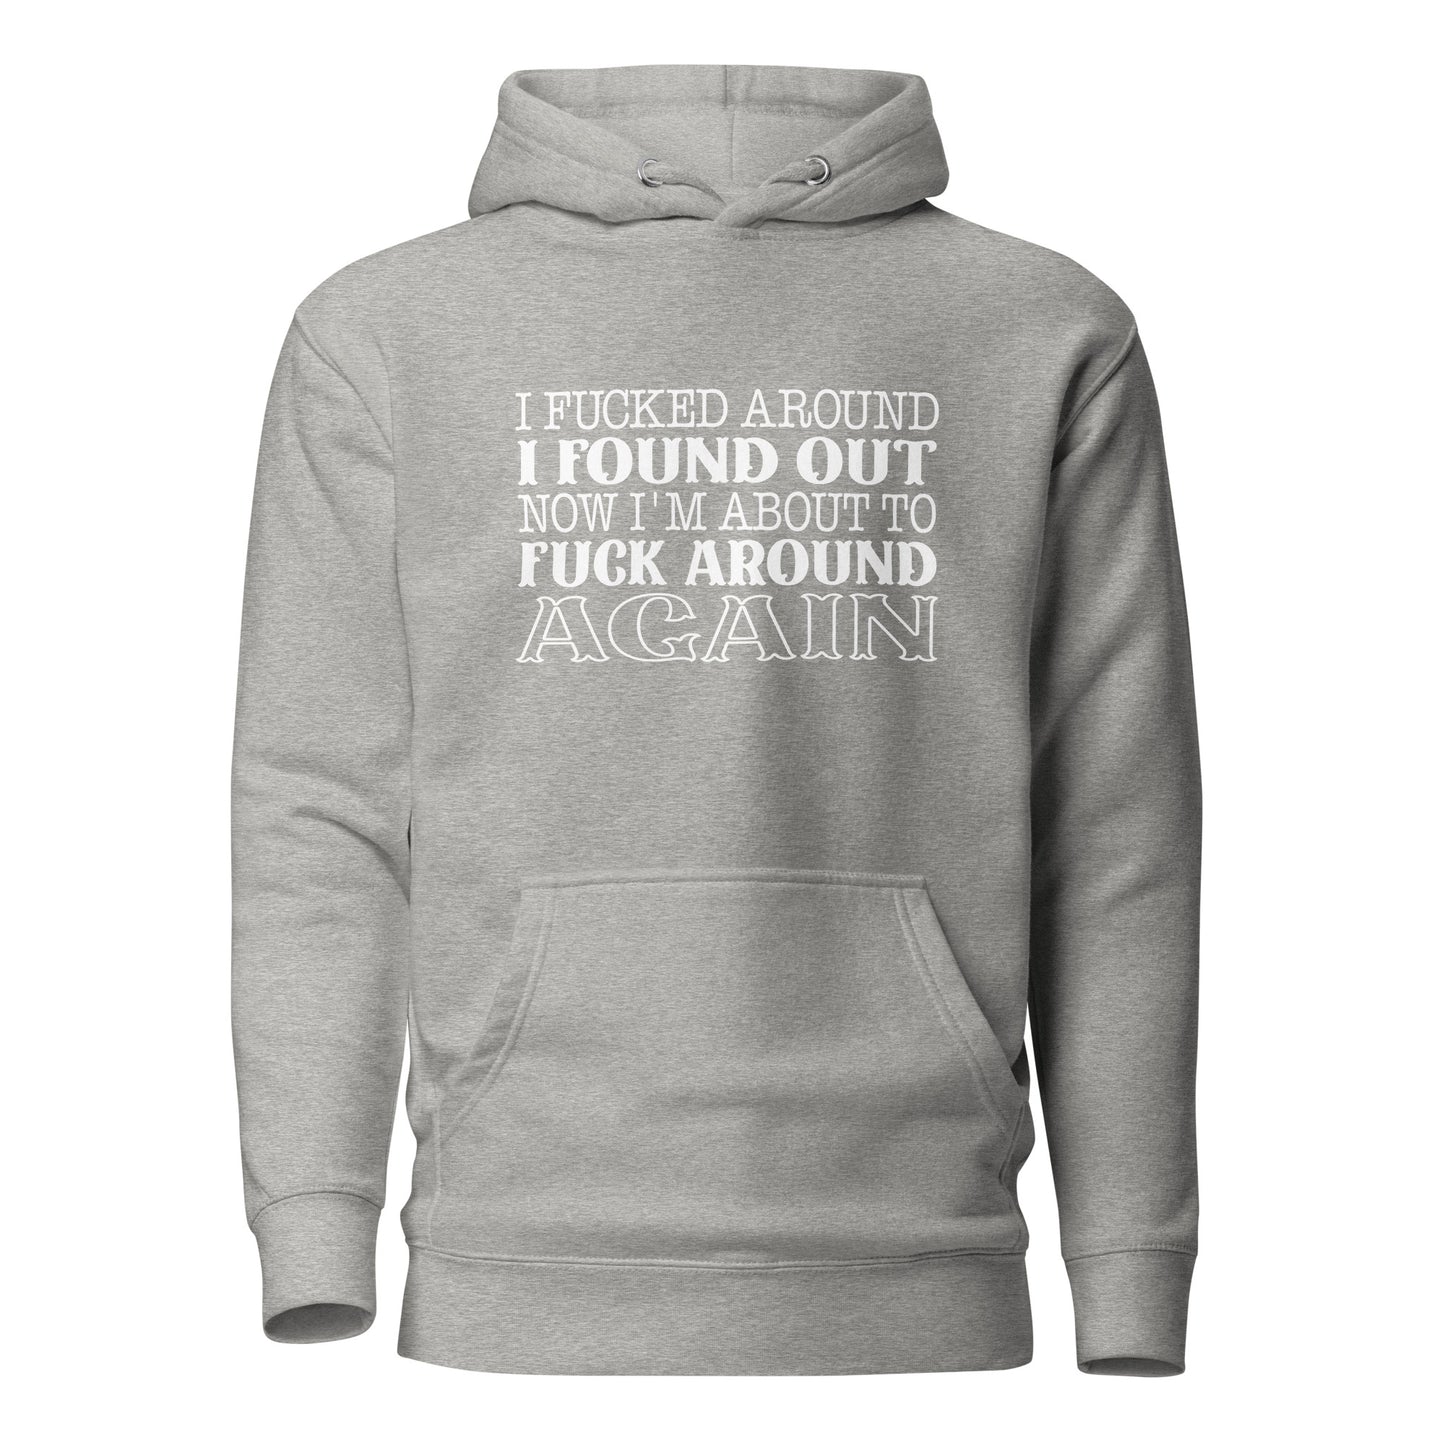 *UCK AROUND AND FIND OUT Unisex Hoodie